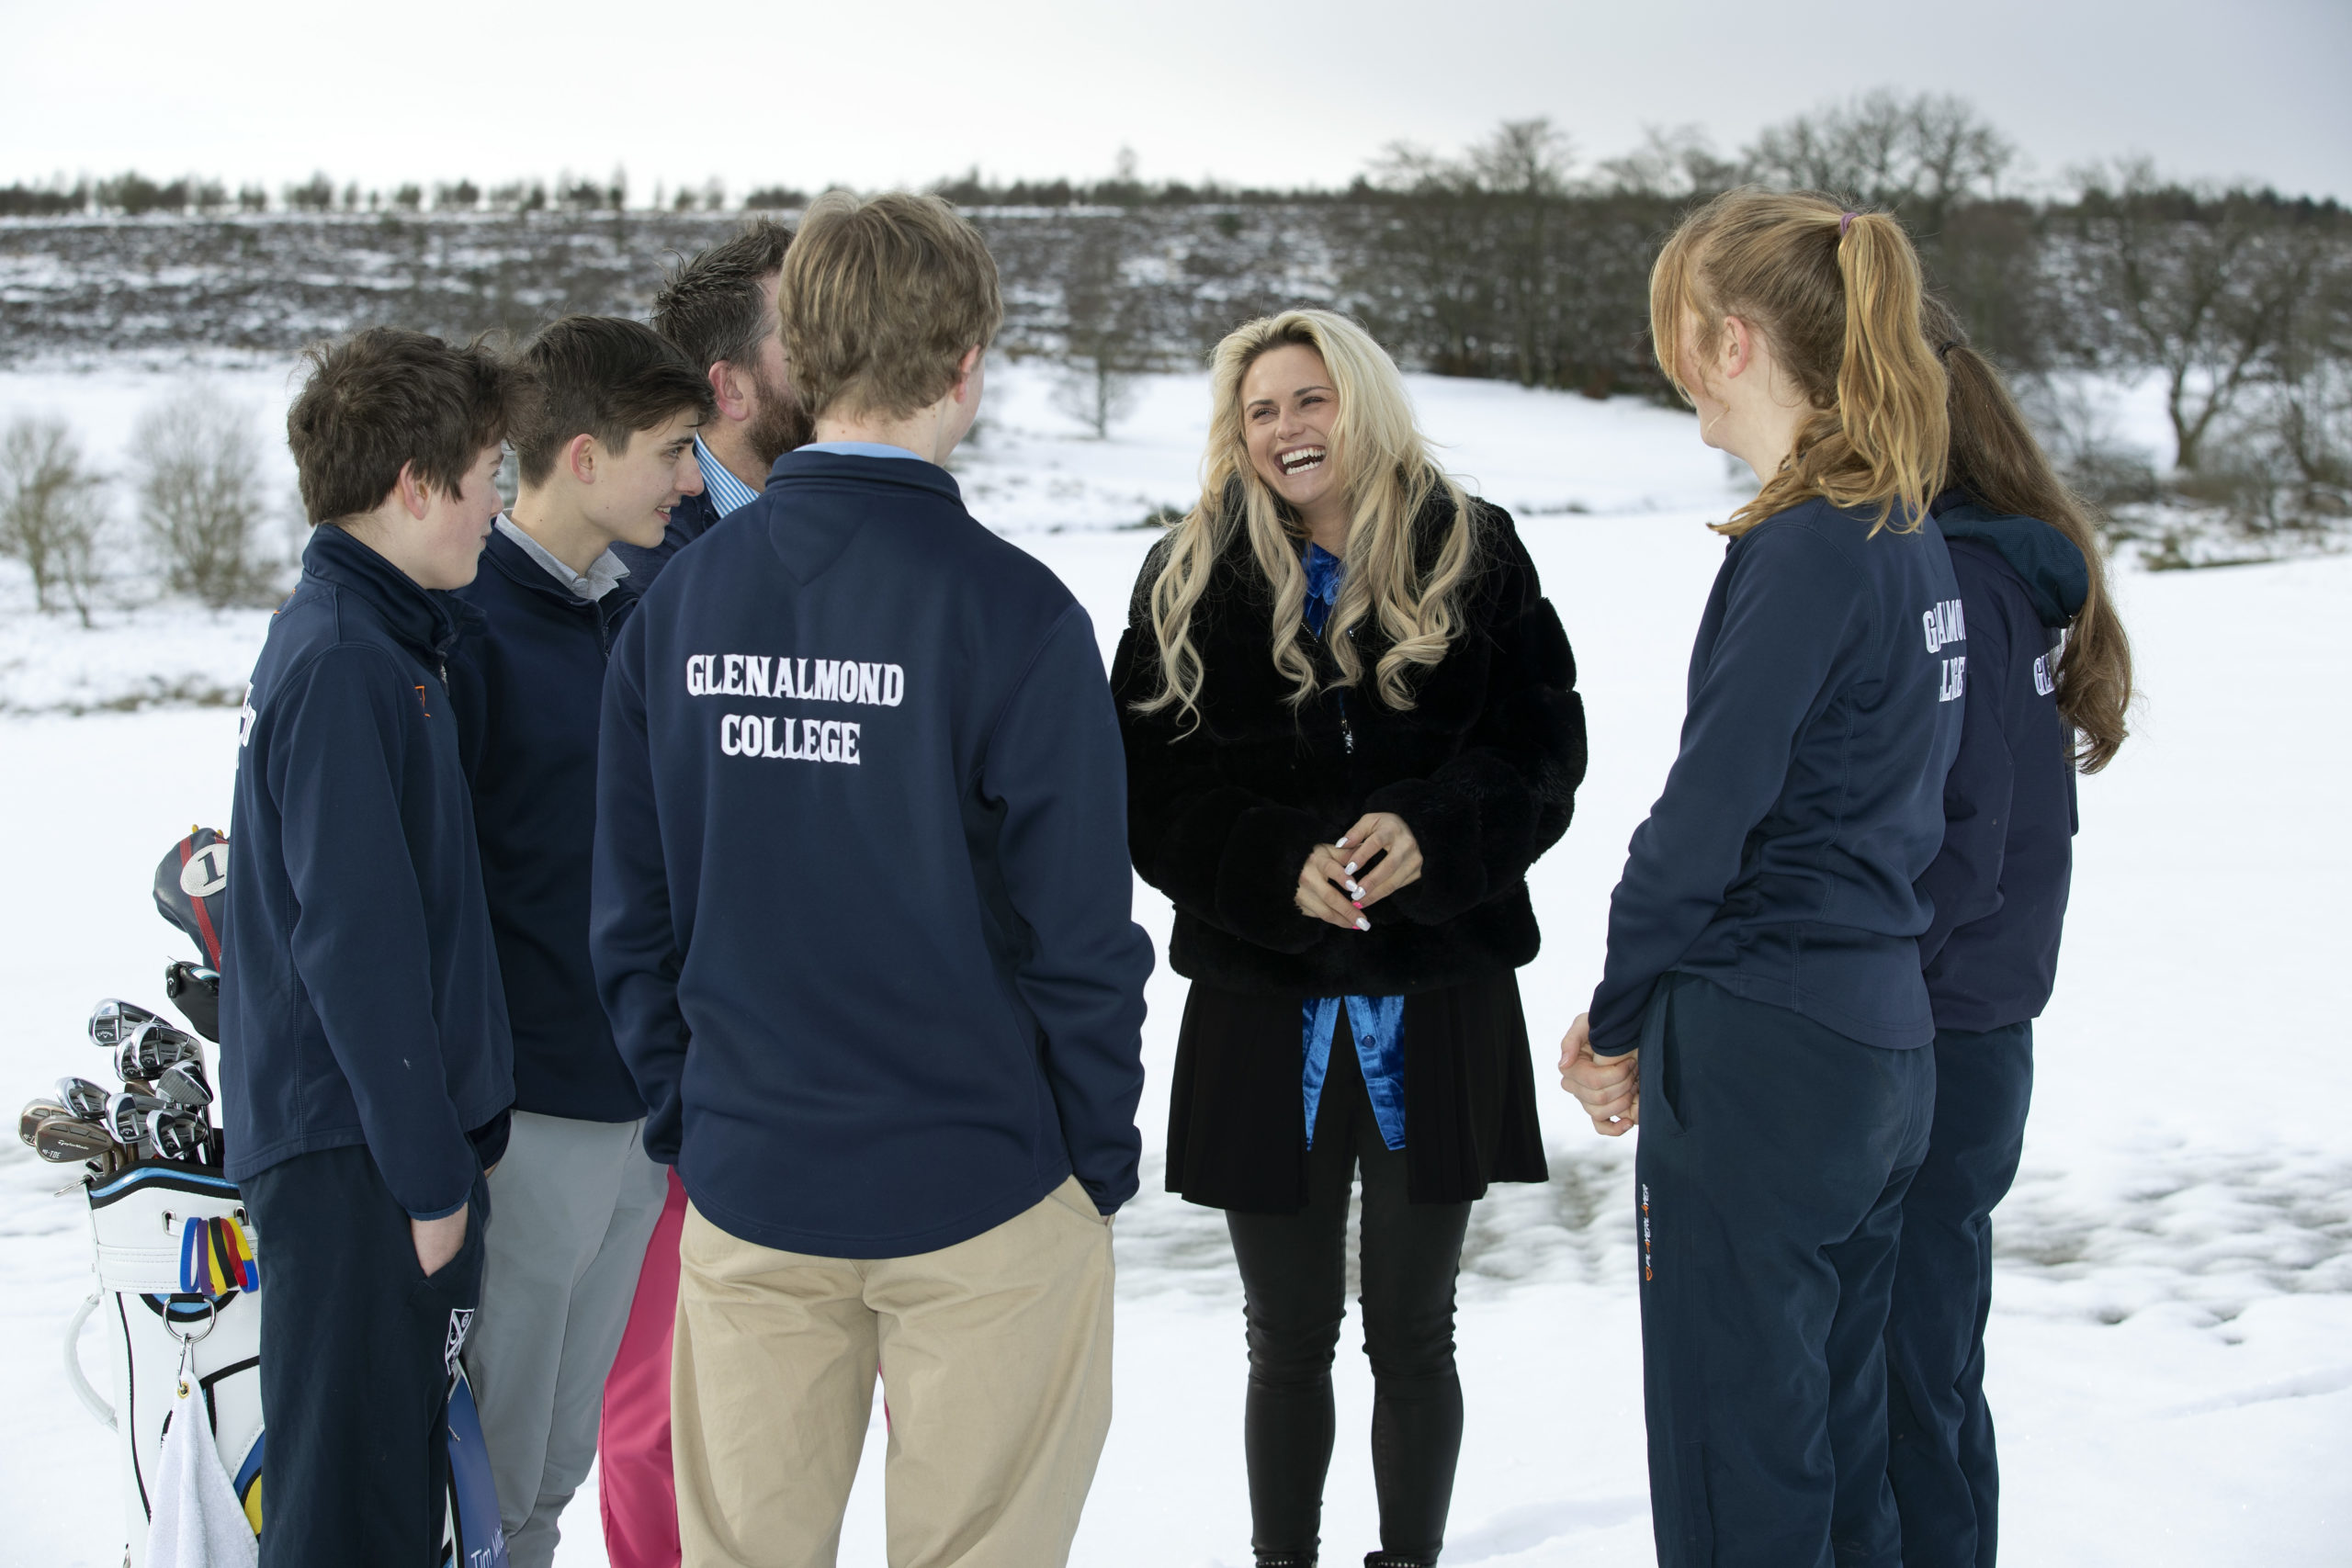 Golfer and former pupil Carly Booth on a visit back to Glenalmond College pictured talking with pupils and Tim Mitchell Head of Golf at Glenalmond College.
Picture by Graeme Hart.
Copyright Perthshire Picture Agency
Tel: 01738 623350  Mobile: 07990 594431